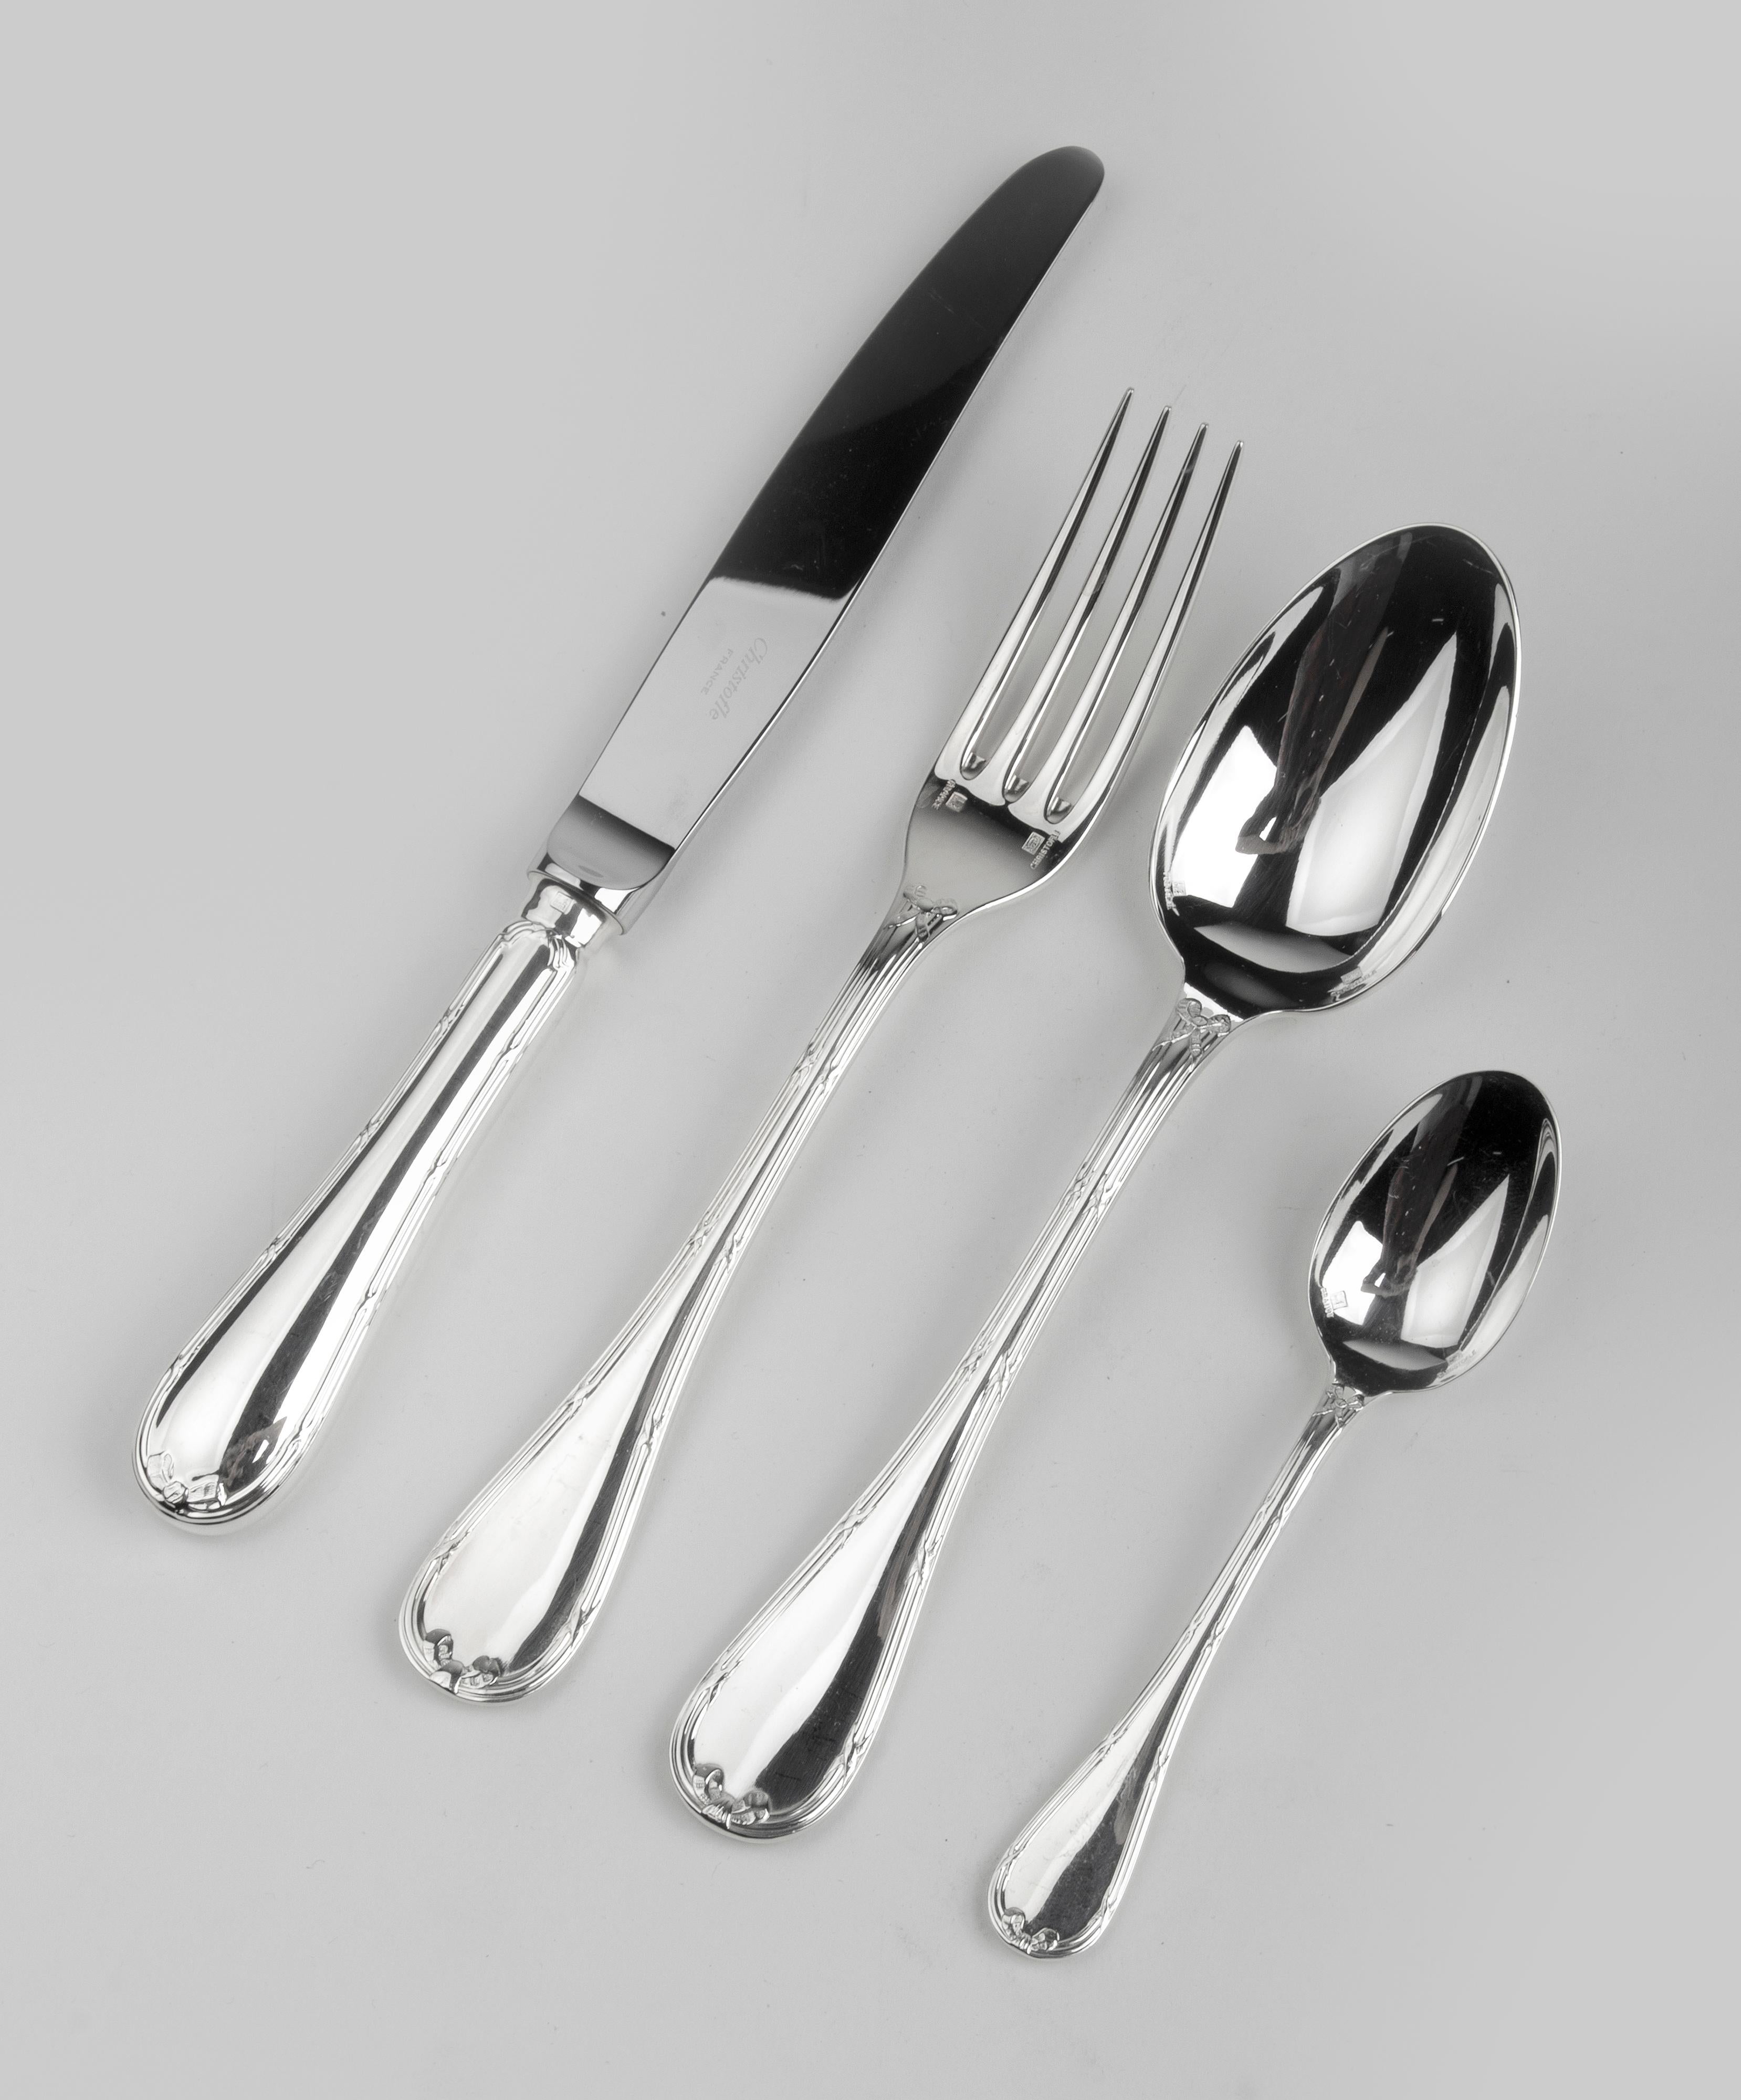 Plated 48-piece Set of Silver-plated Christofle Flatware - Rubans